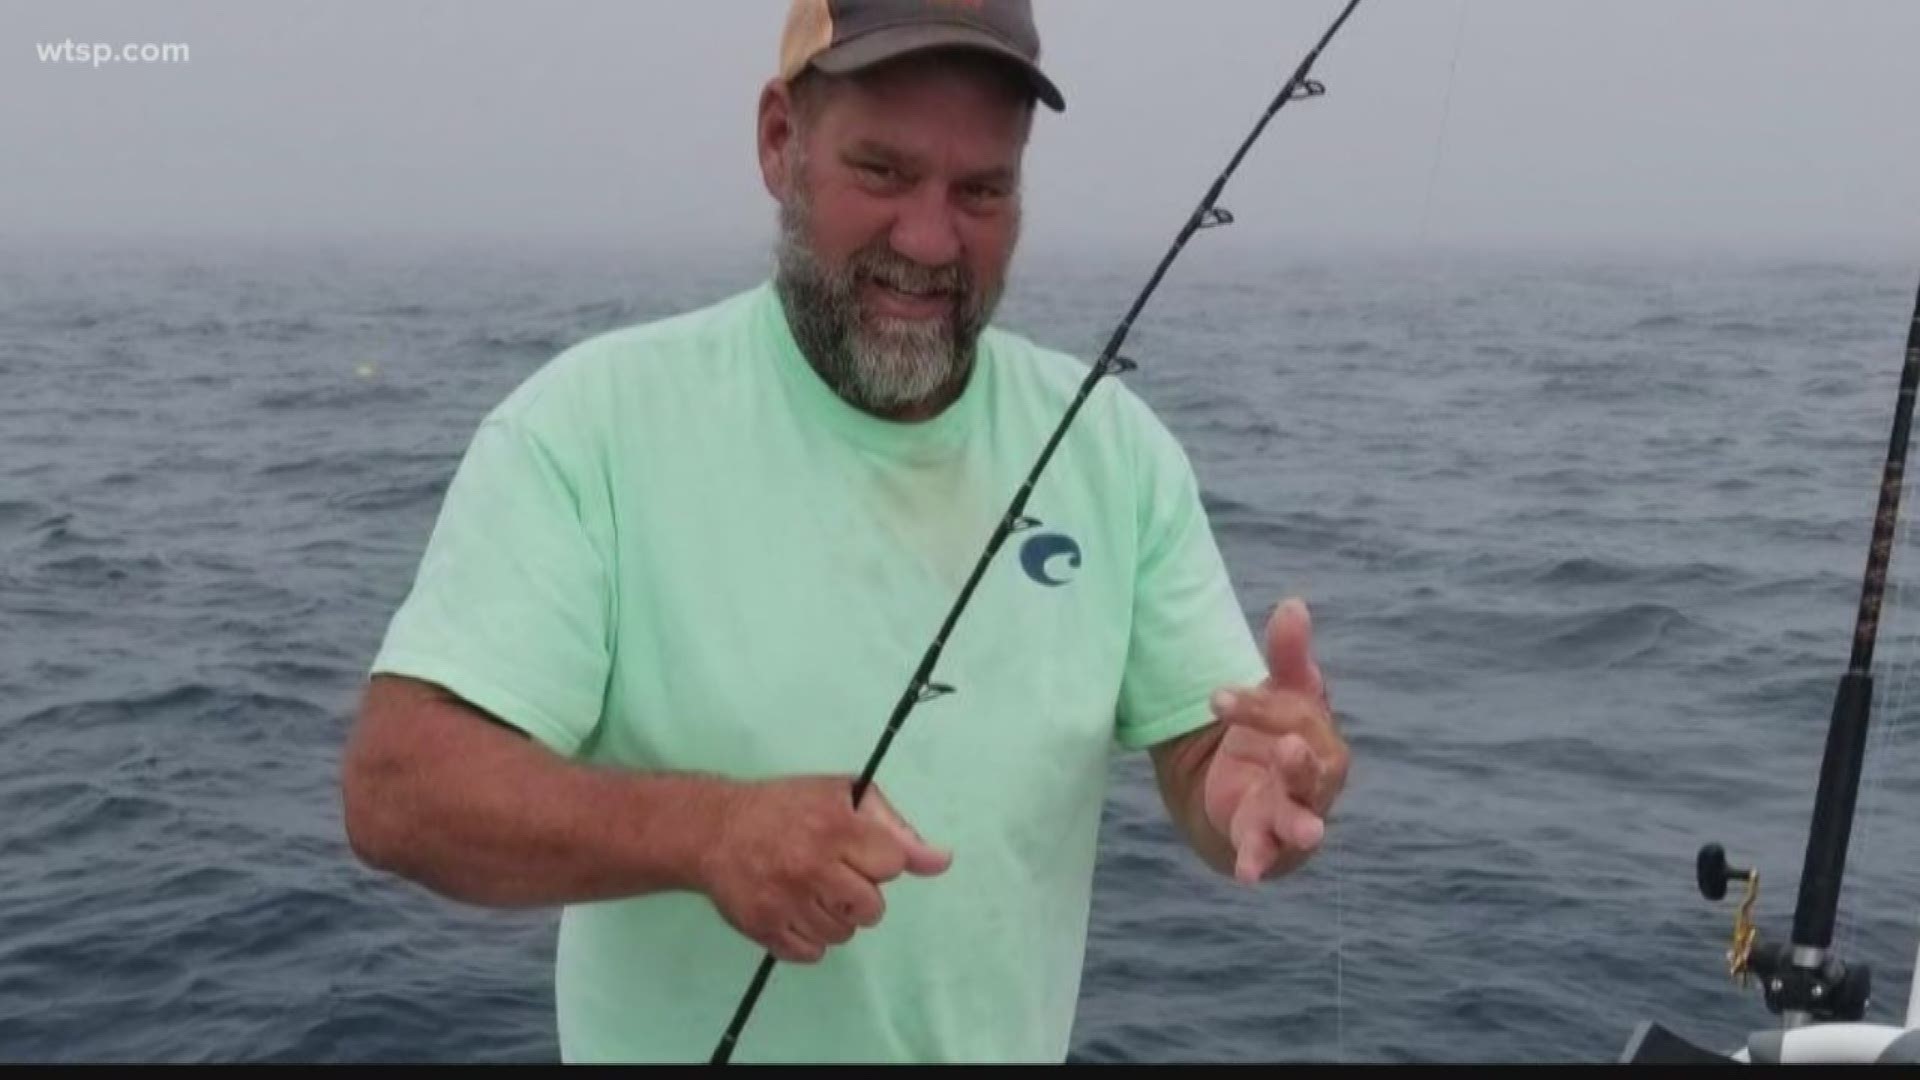 WARNING: This story contains graphic content. 

A Florida fisherman is recovering after a fishing trip in the Gulf of Mexico left him with a “flesh-eating” bacteria.

Mike Walton was sent to the hospital by necrotizing fasciitis, a rare and life-threatening infection.